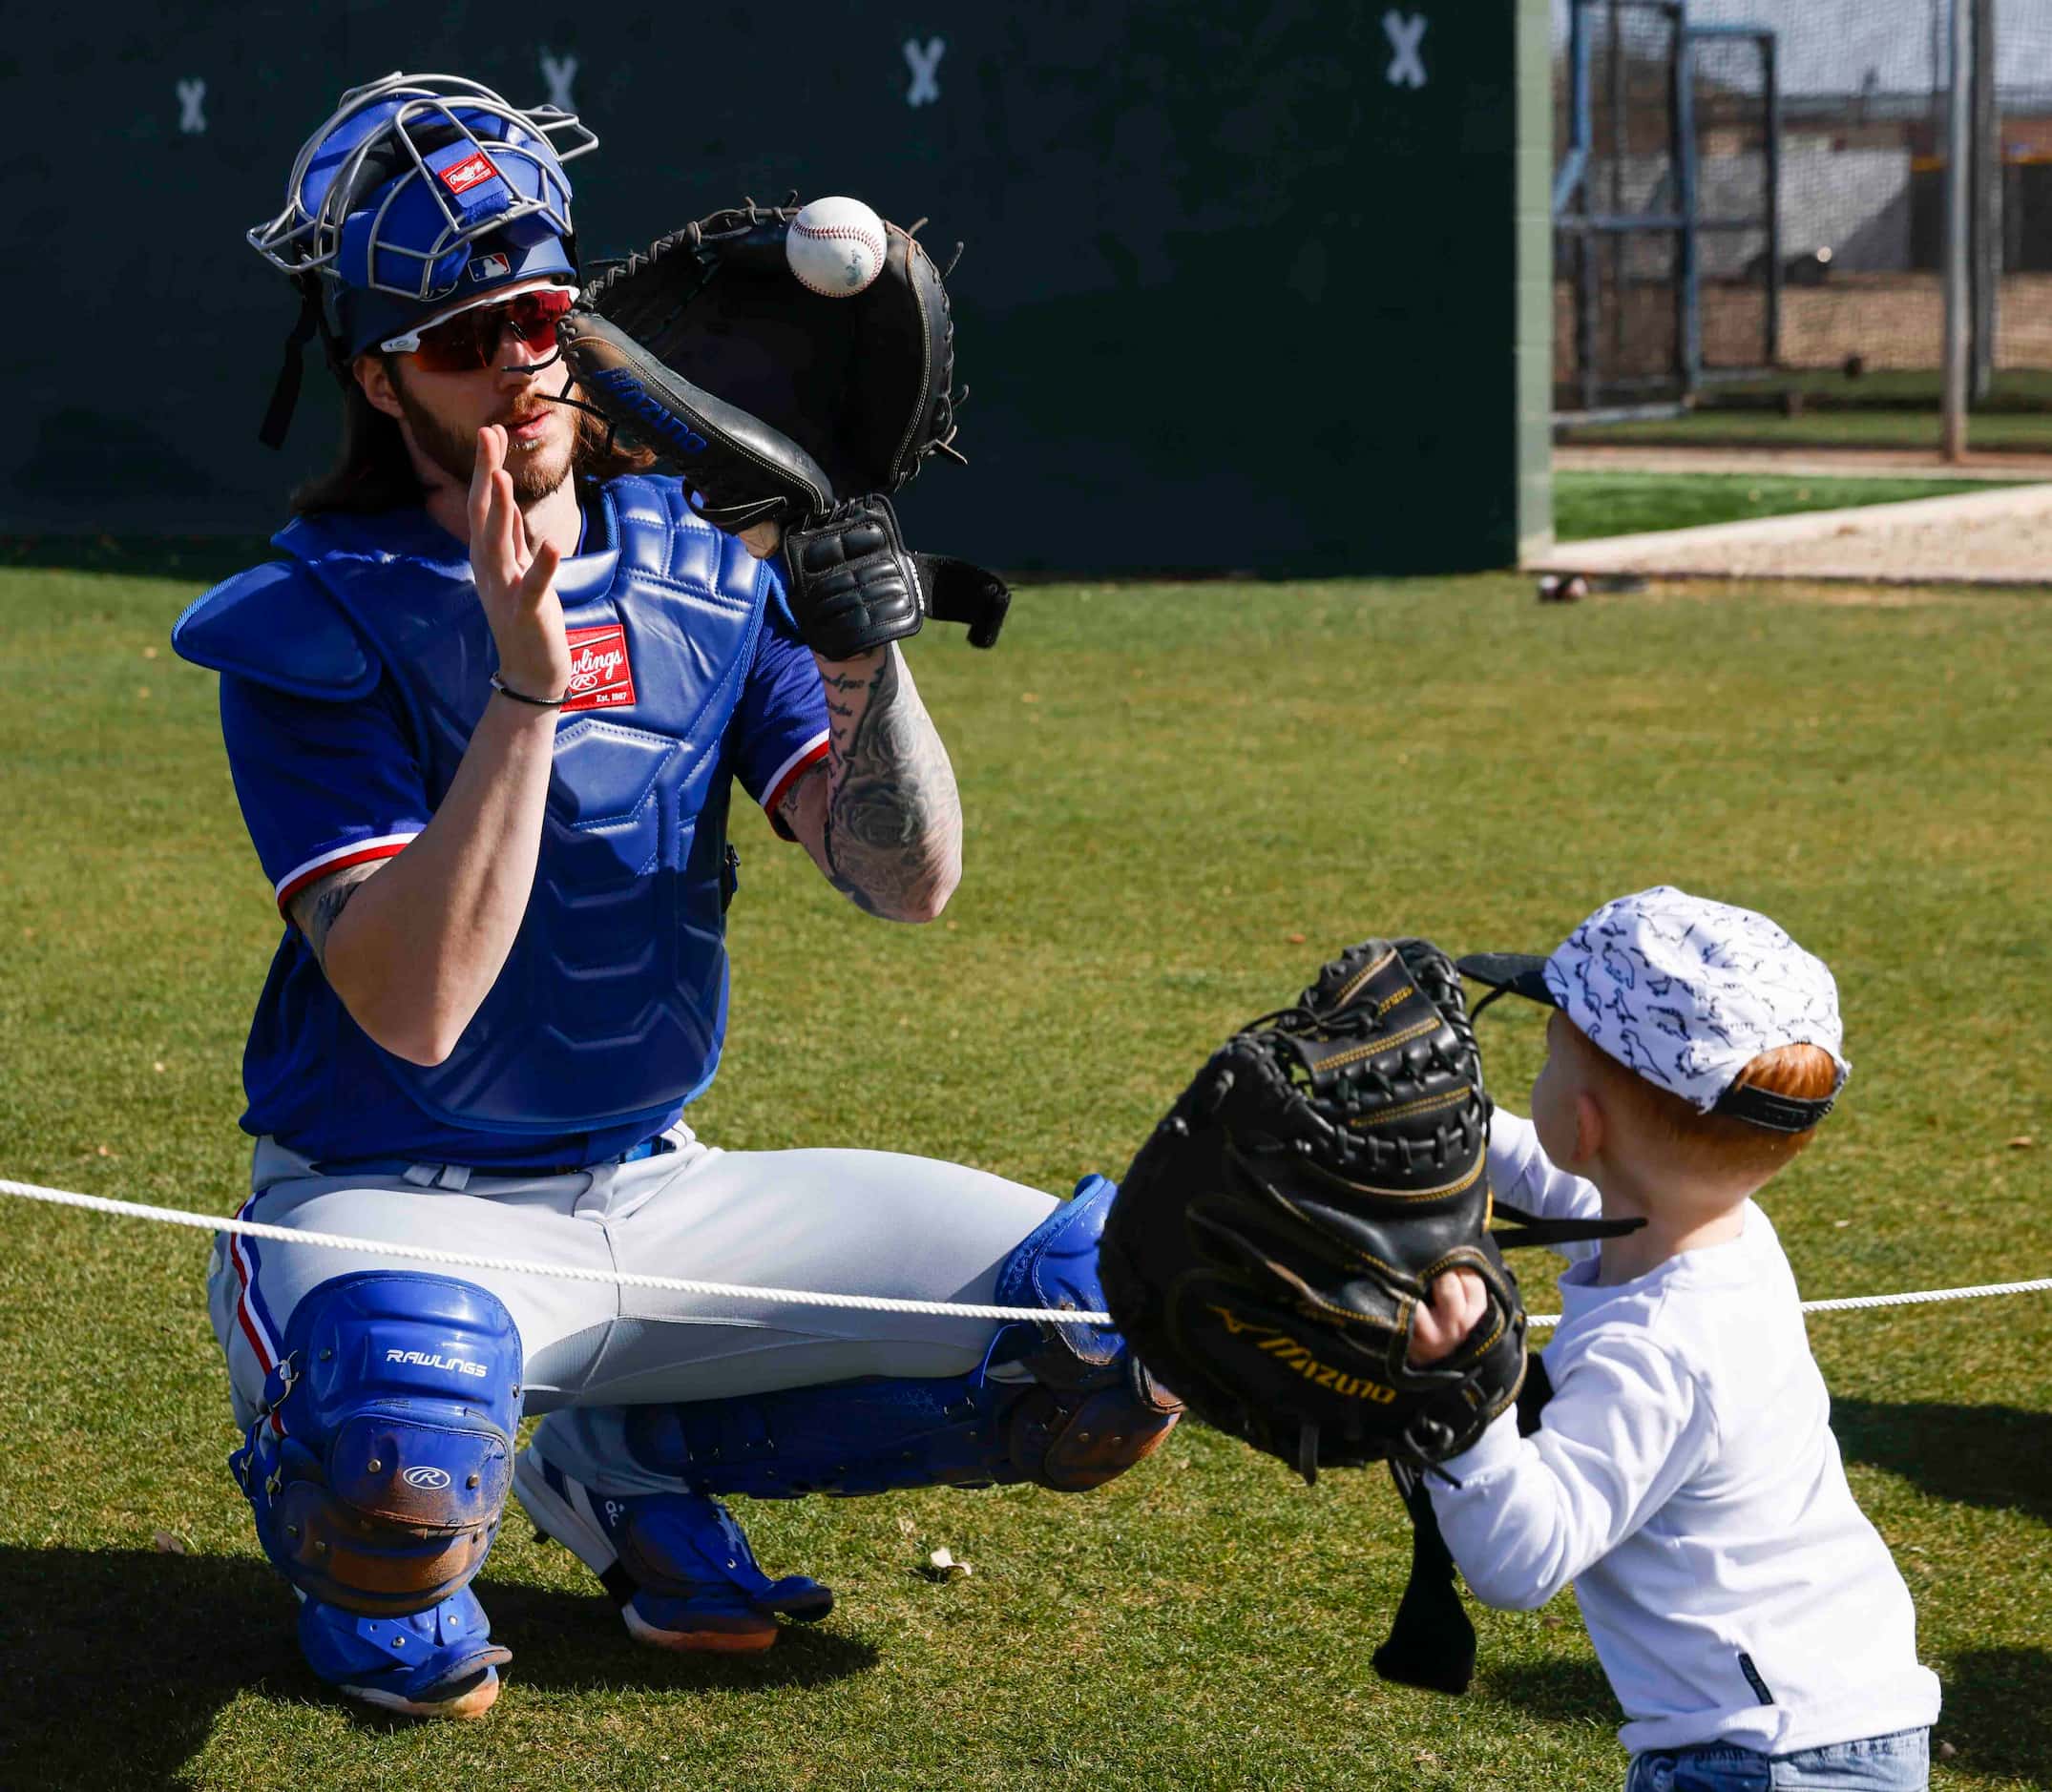 Texas Rangers catcher Jonah Heim catches a ball while playing with his son Mash, 2, before a...